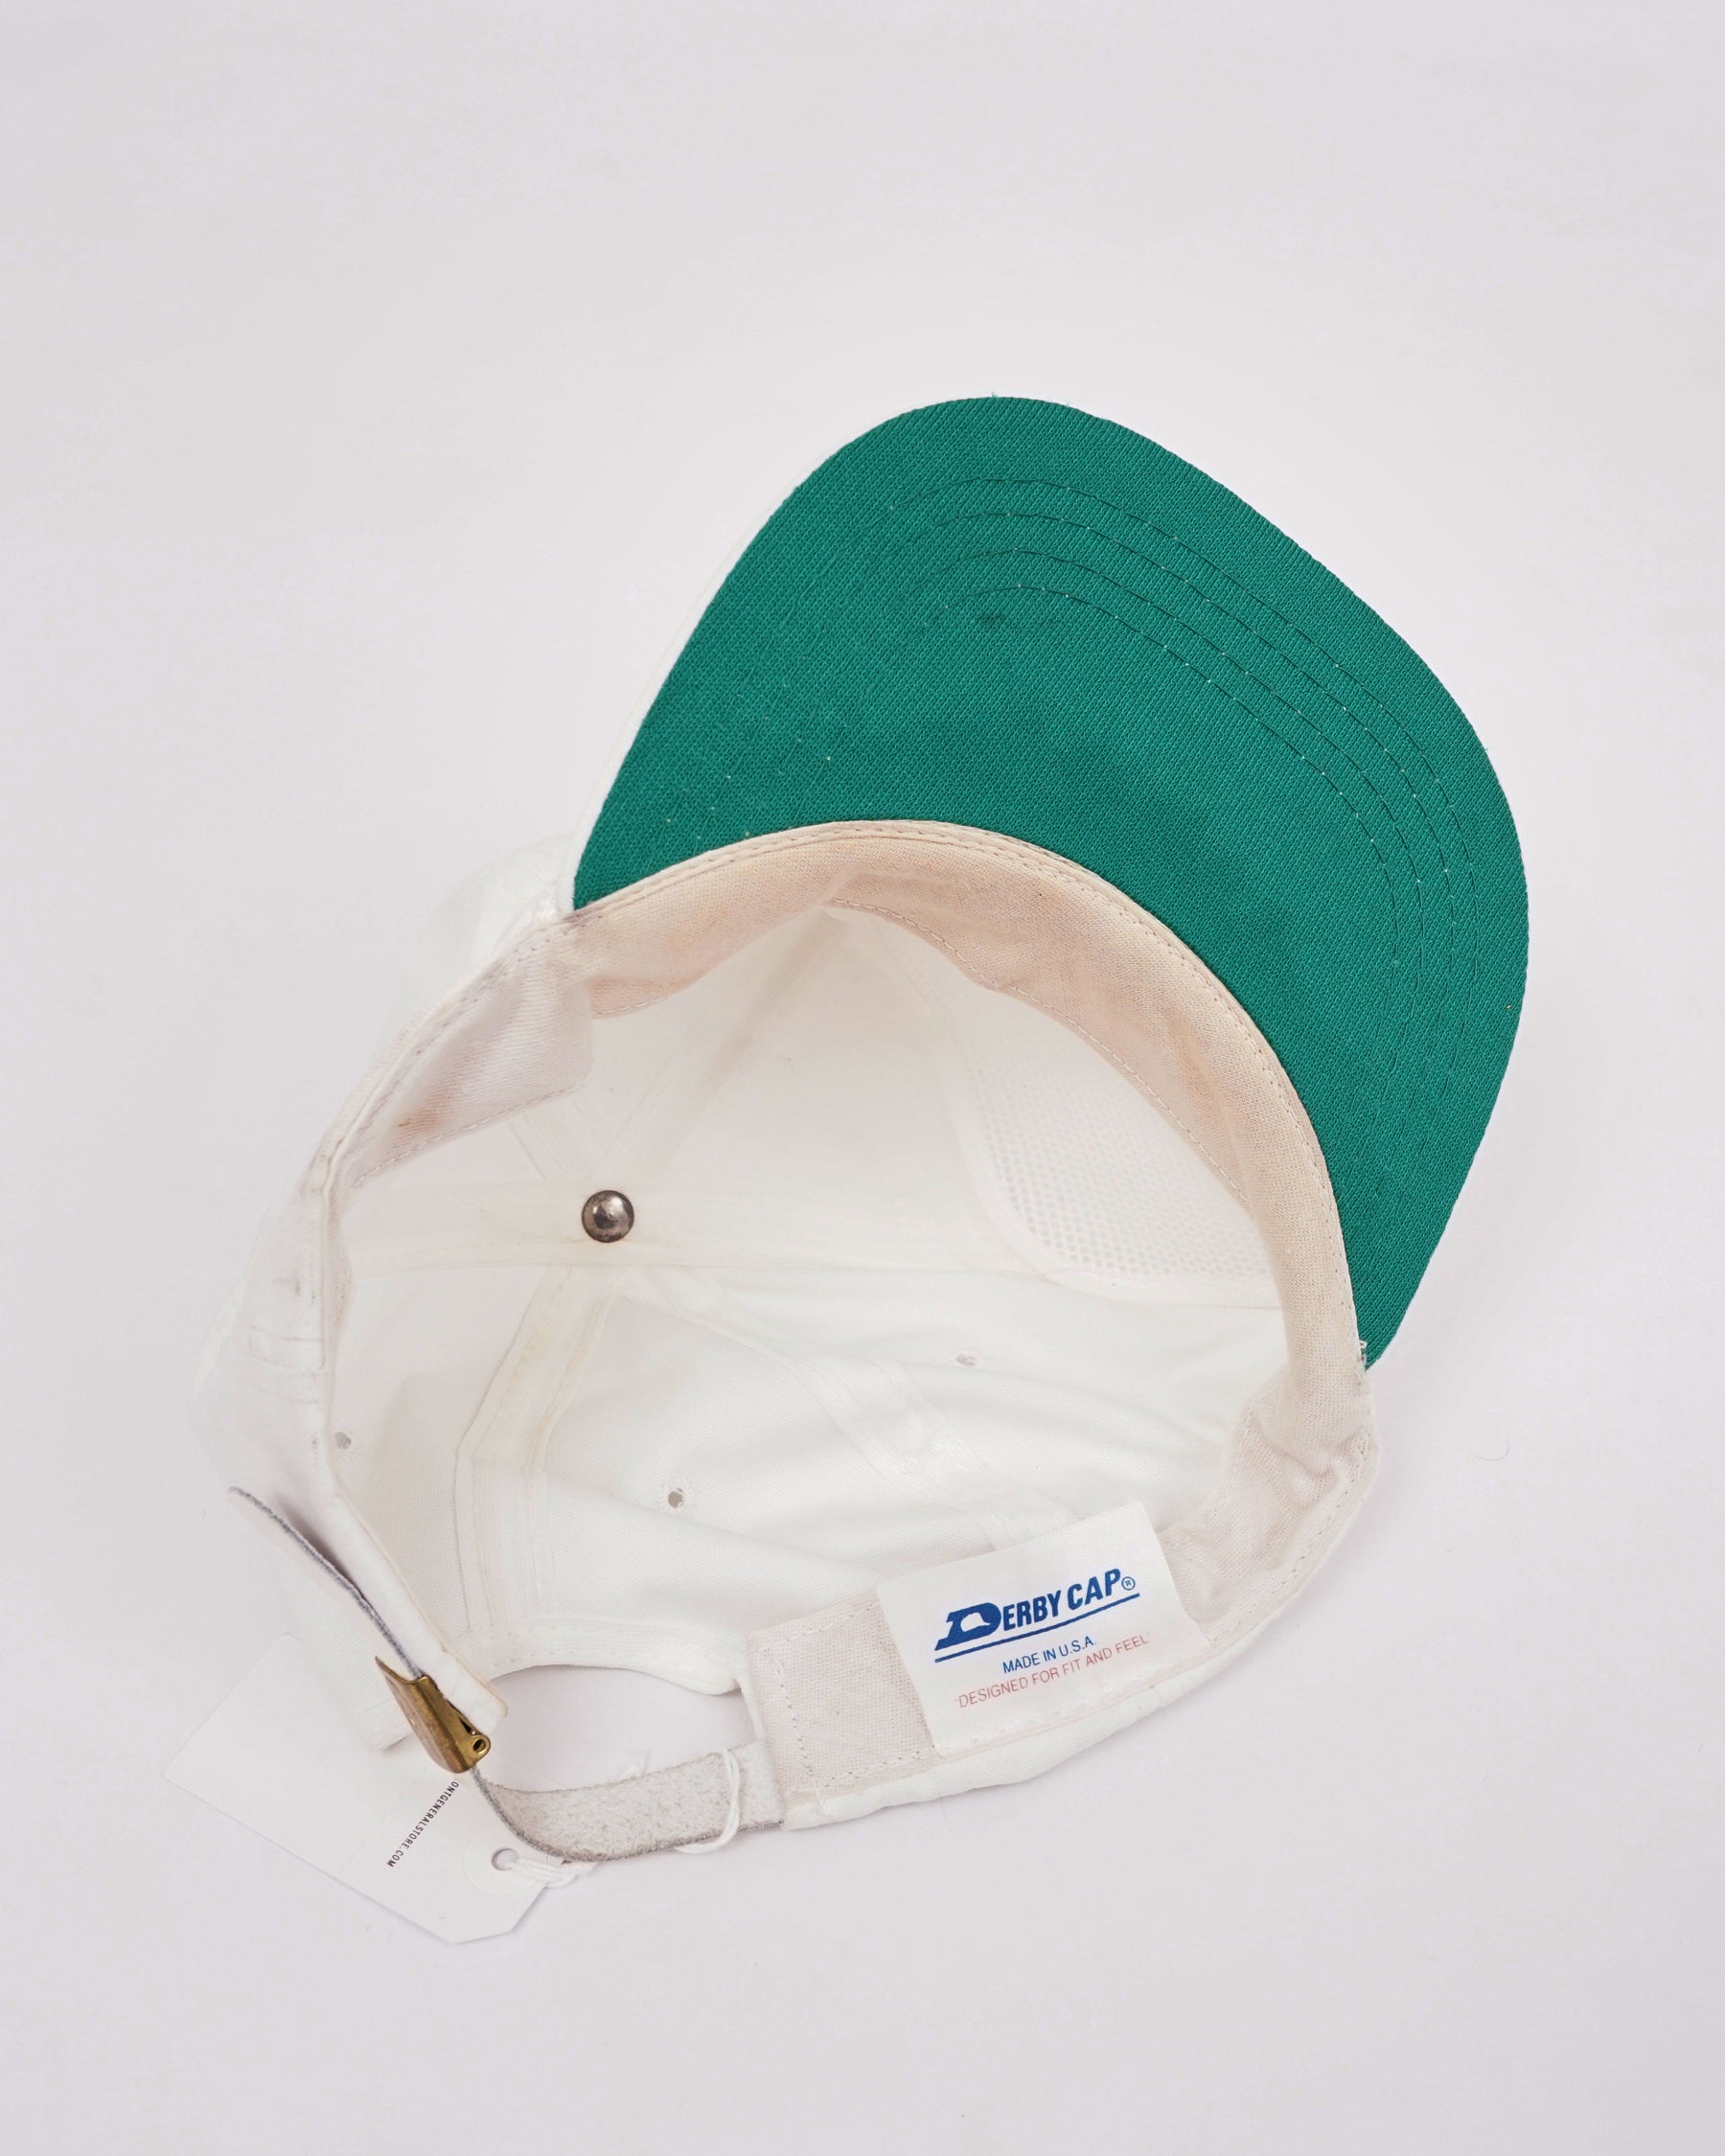 Made in USA Hershey's Derby Cap